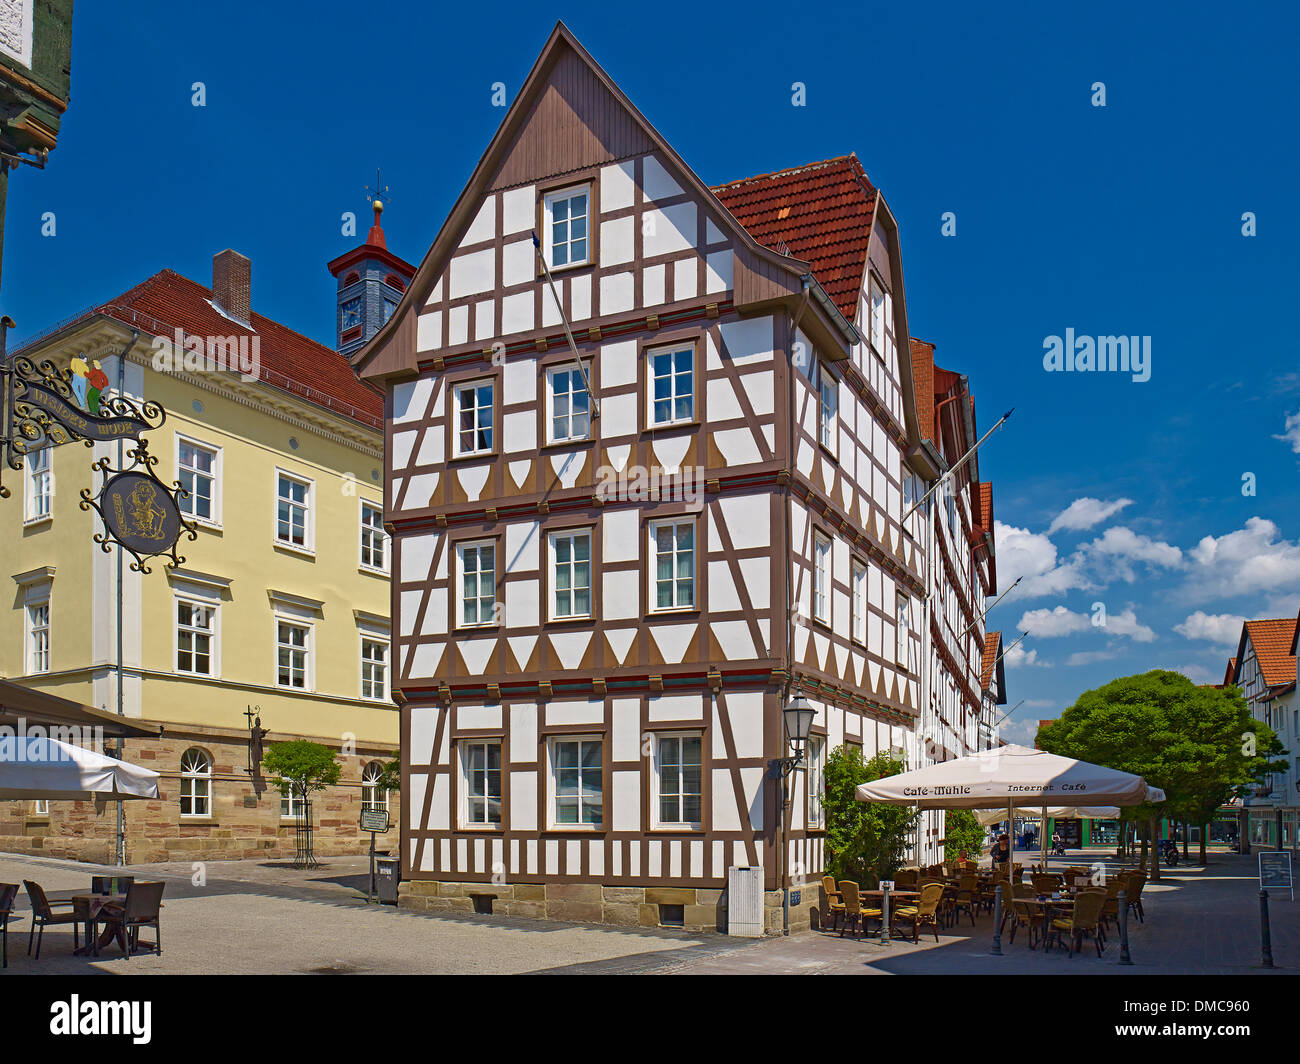 Half-timbered houses in the old town of Eschwege, Werra-Meissner district, Hesse, Germany Stock Photo